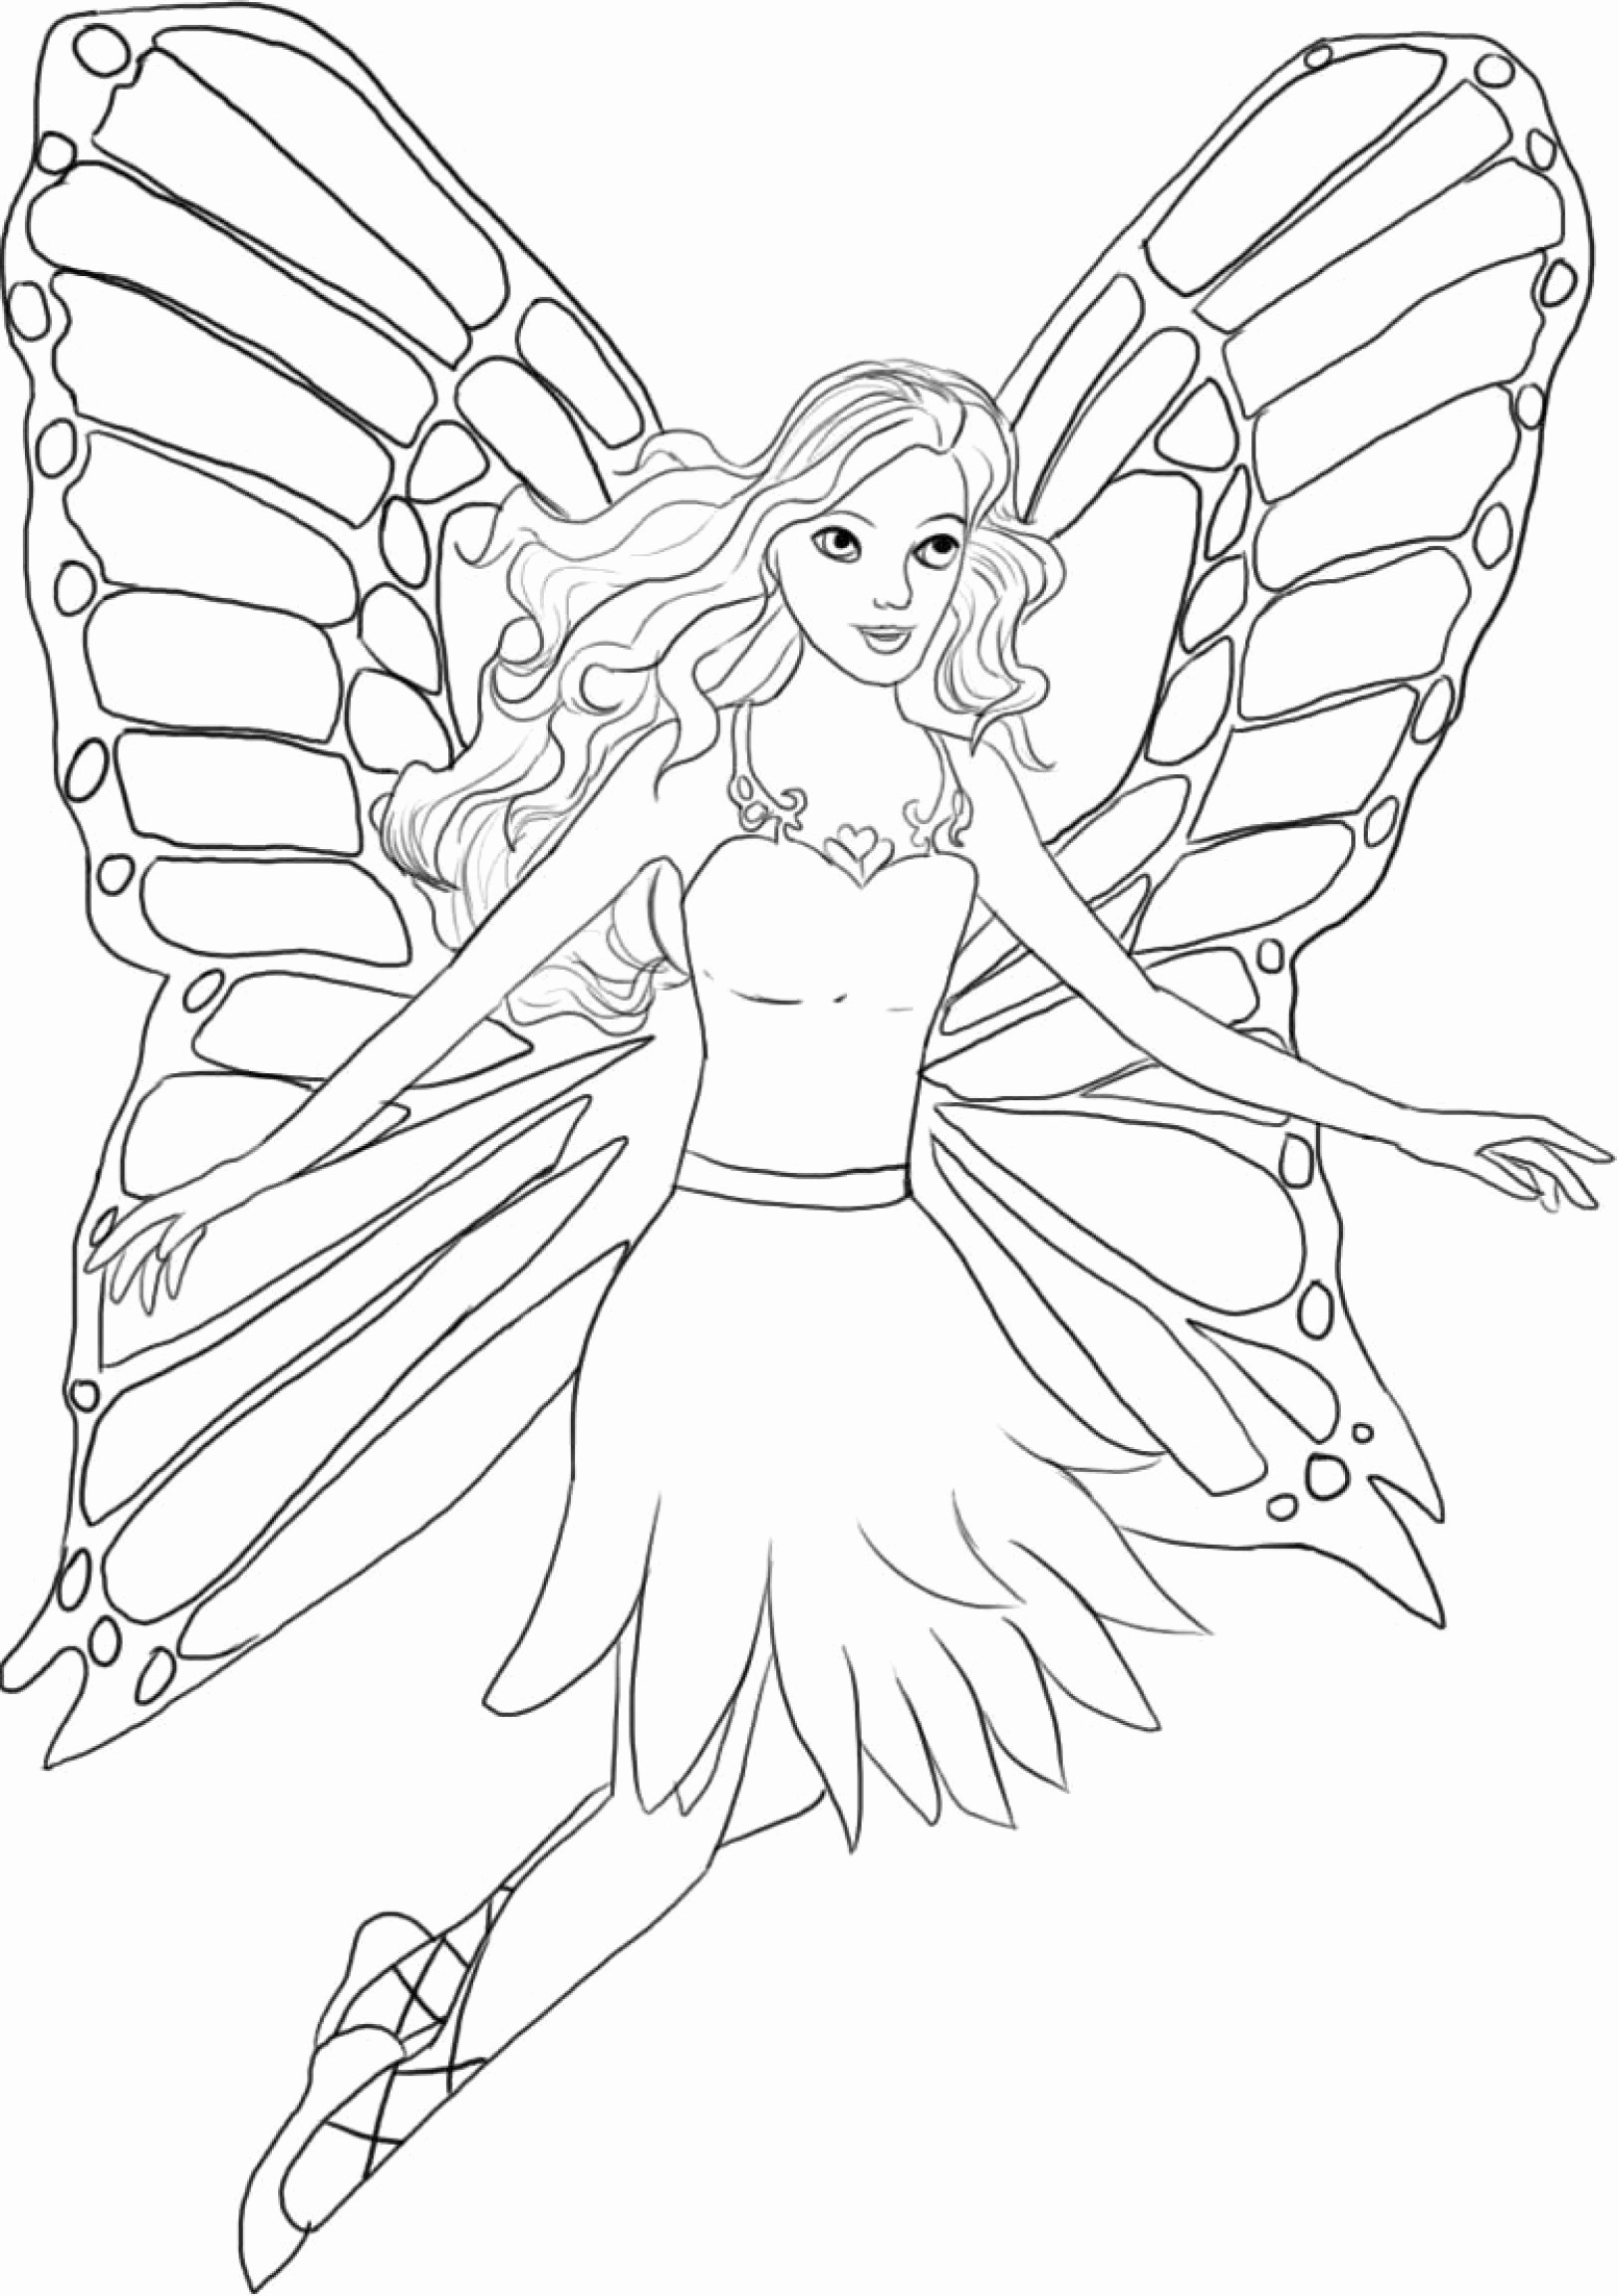 Colouring Pages Of Princesses and Fairies Wallpaper